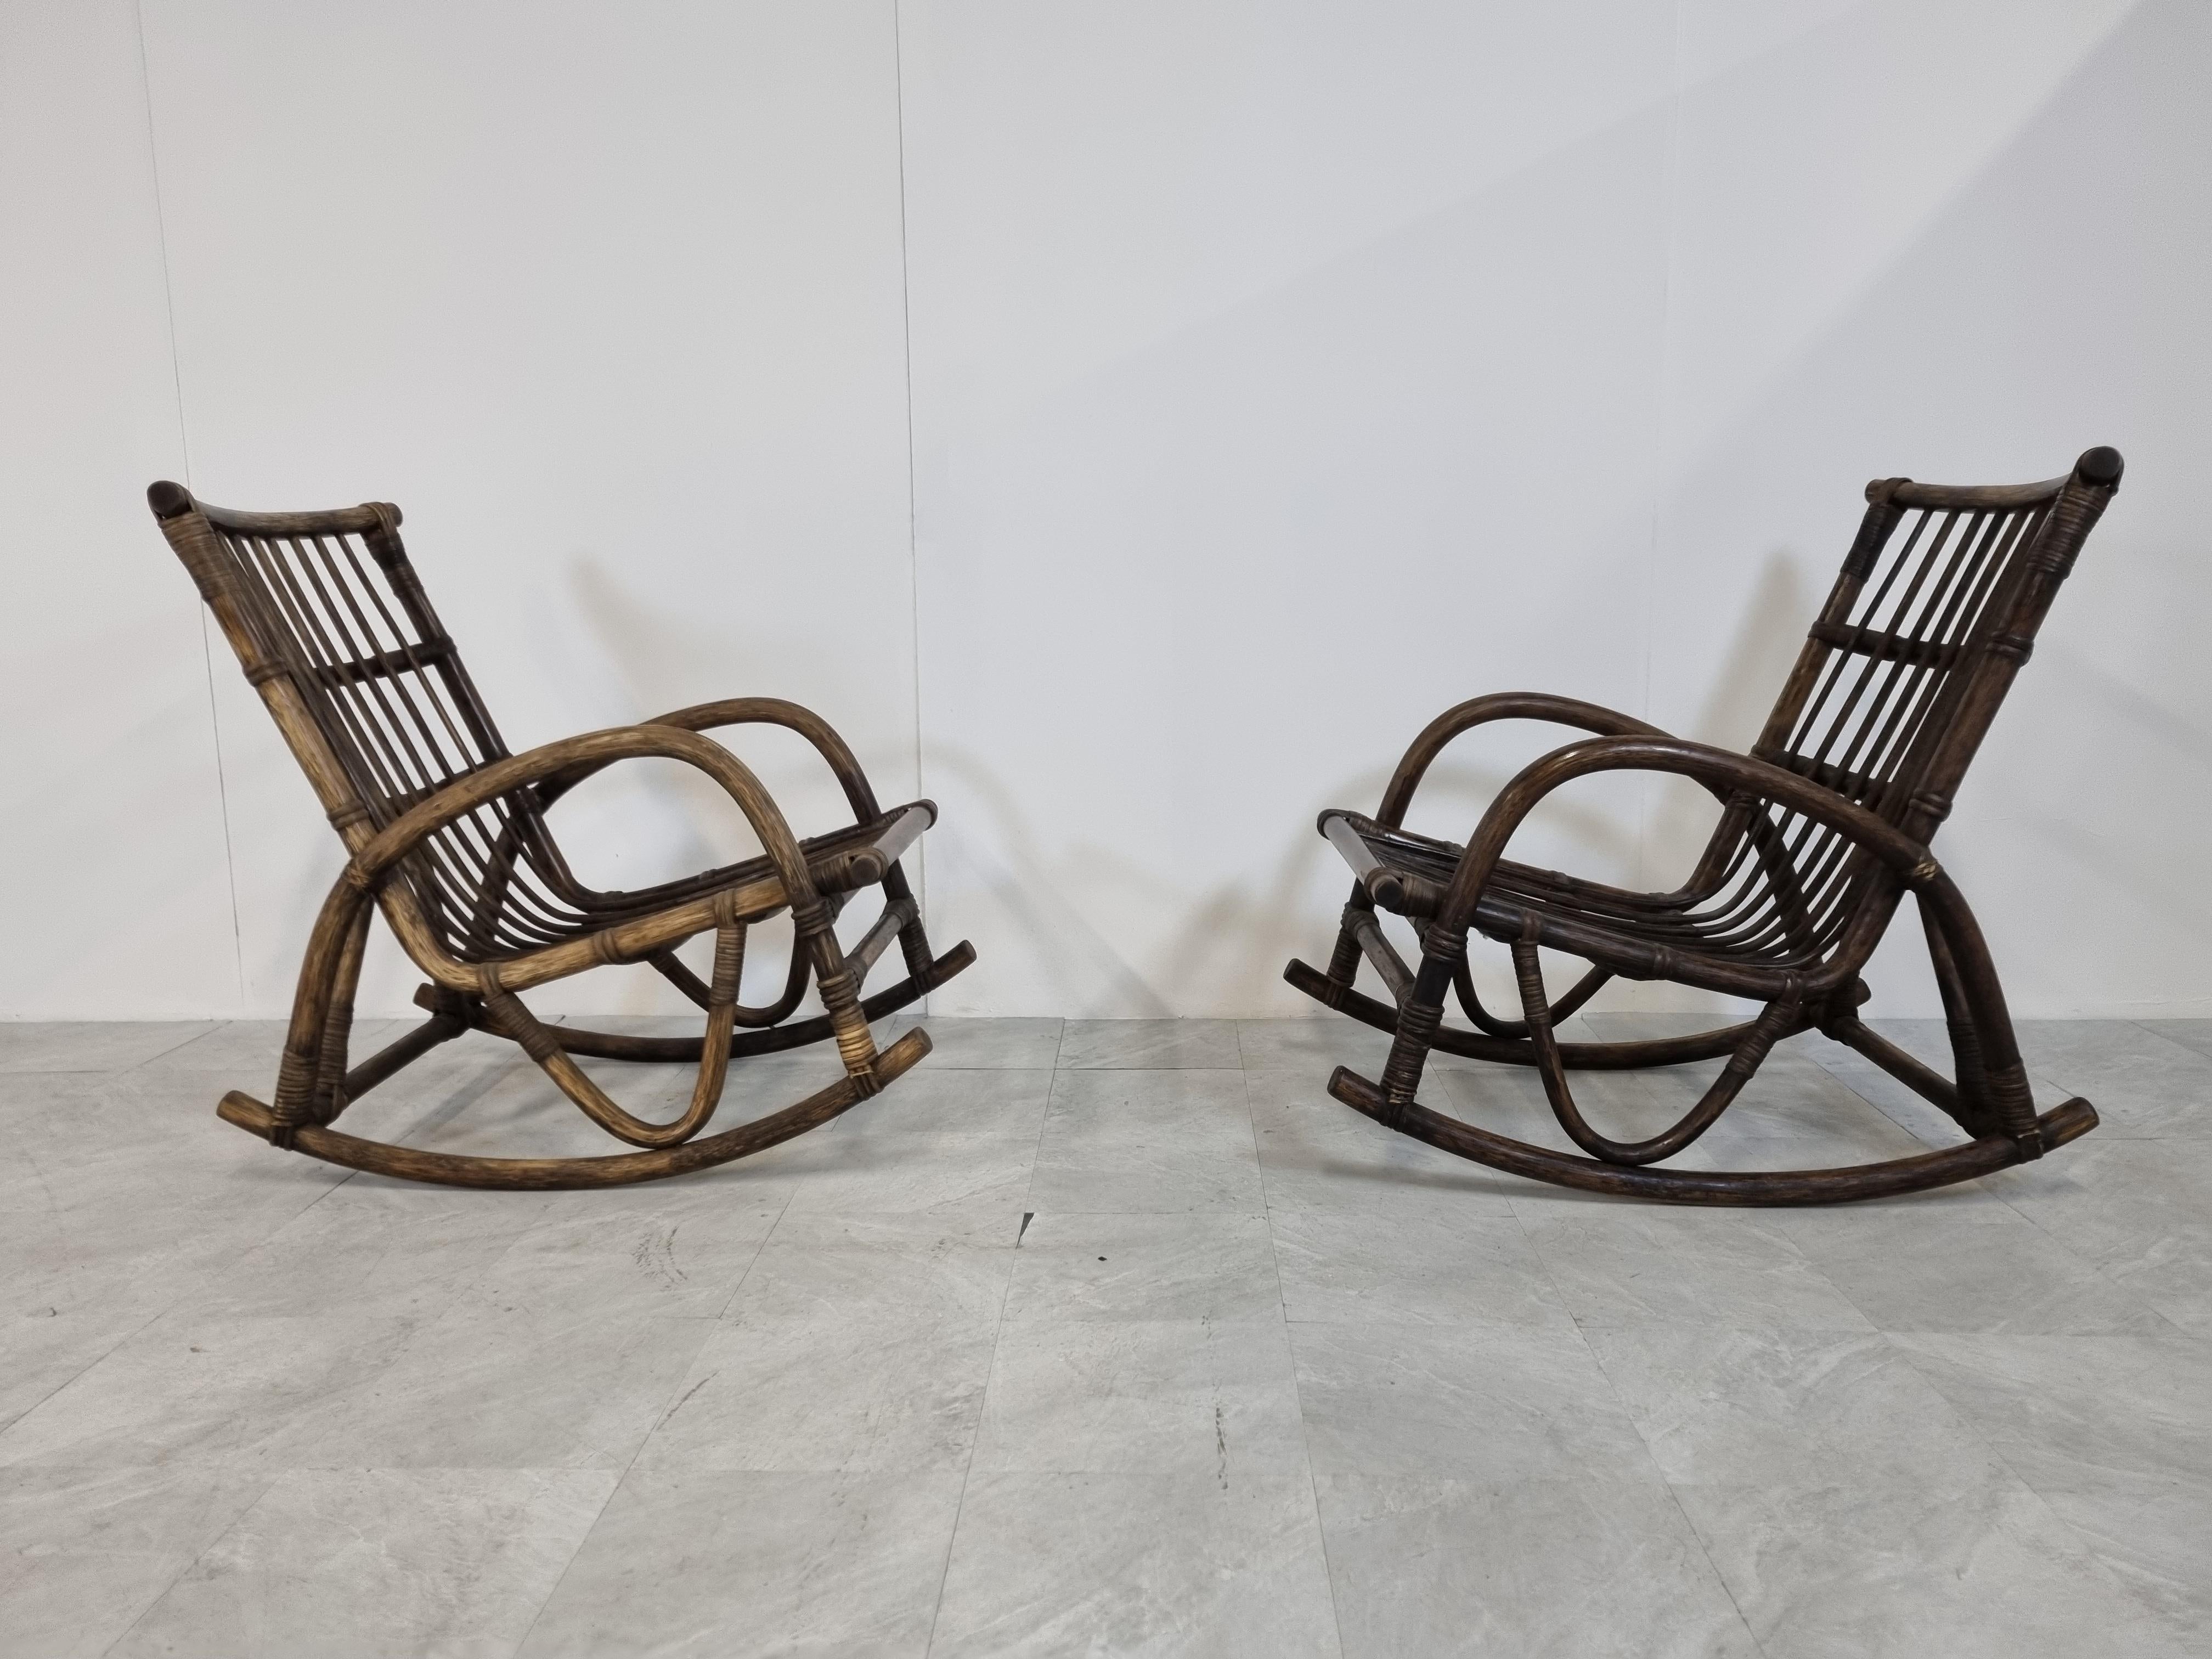 Italian Pair of Vintage Bentwood Rocking Chairs, 1960s